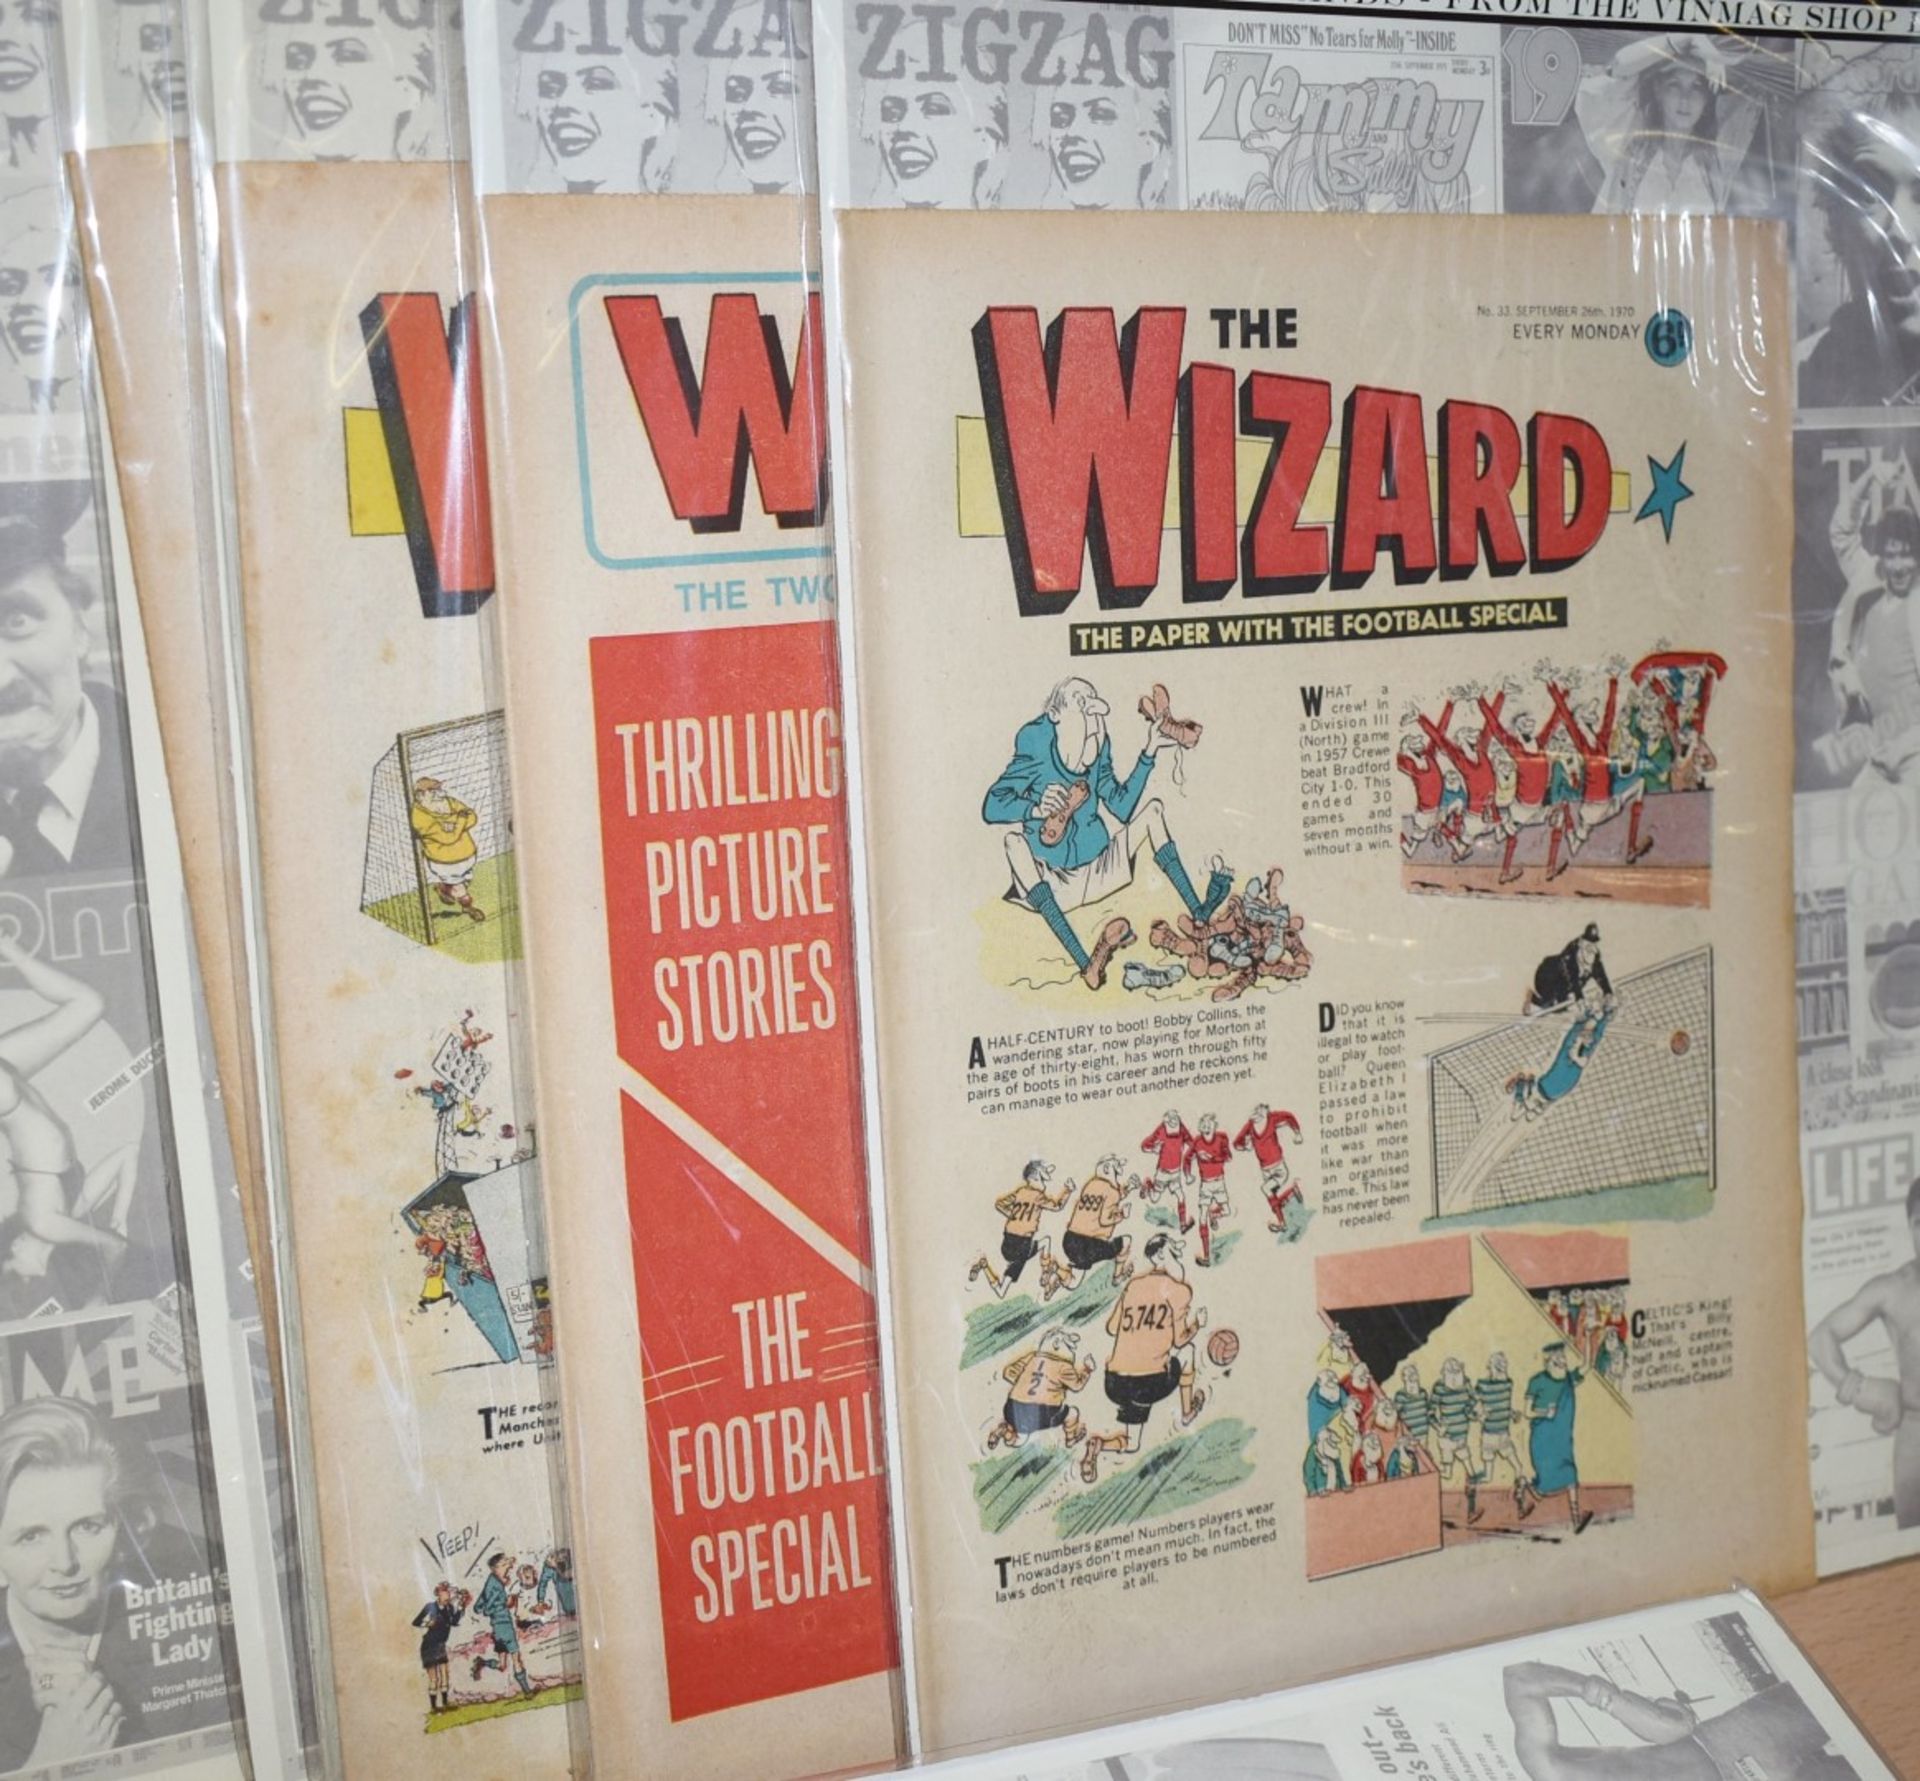 23 x Vintage WIZARD Comic Books Dated 1970 - Ref MB148 - CL431 - Individually Packaged in Protective